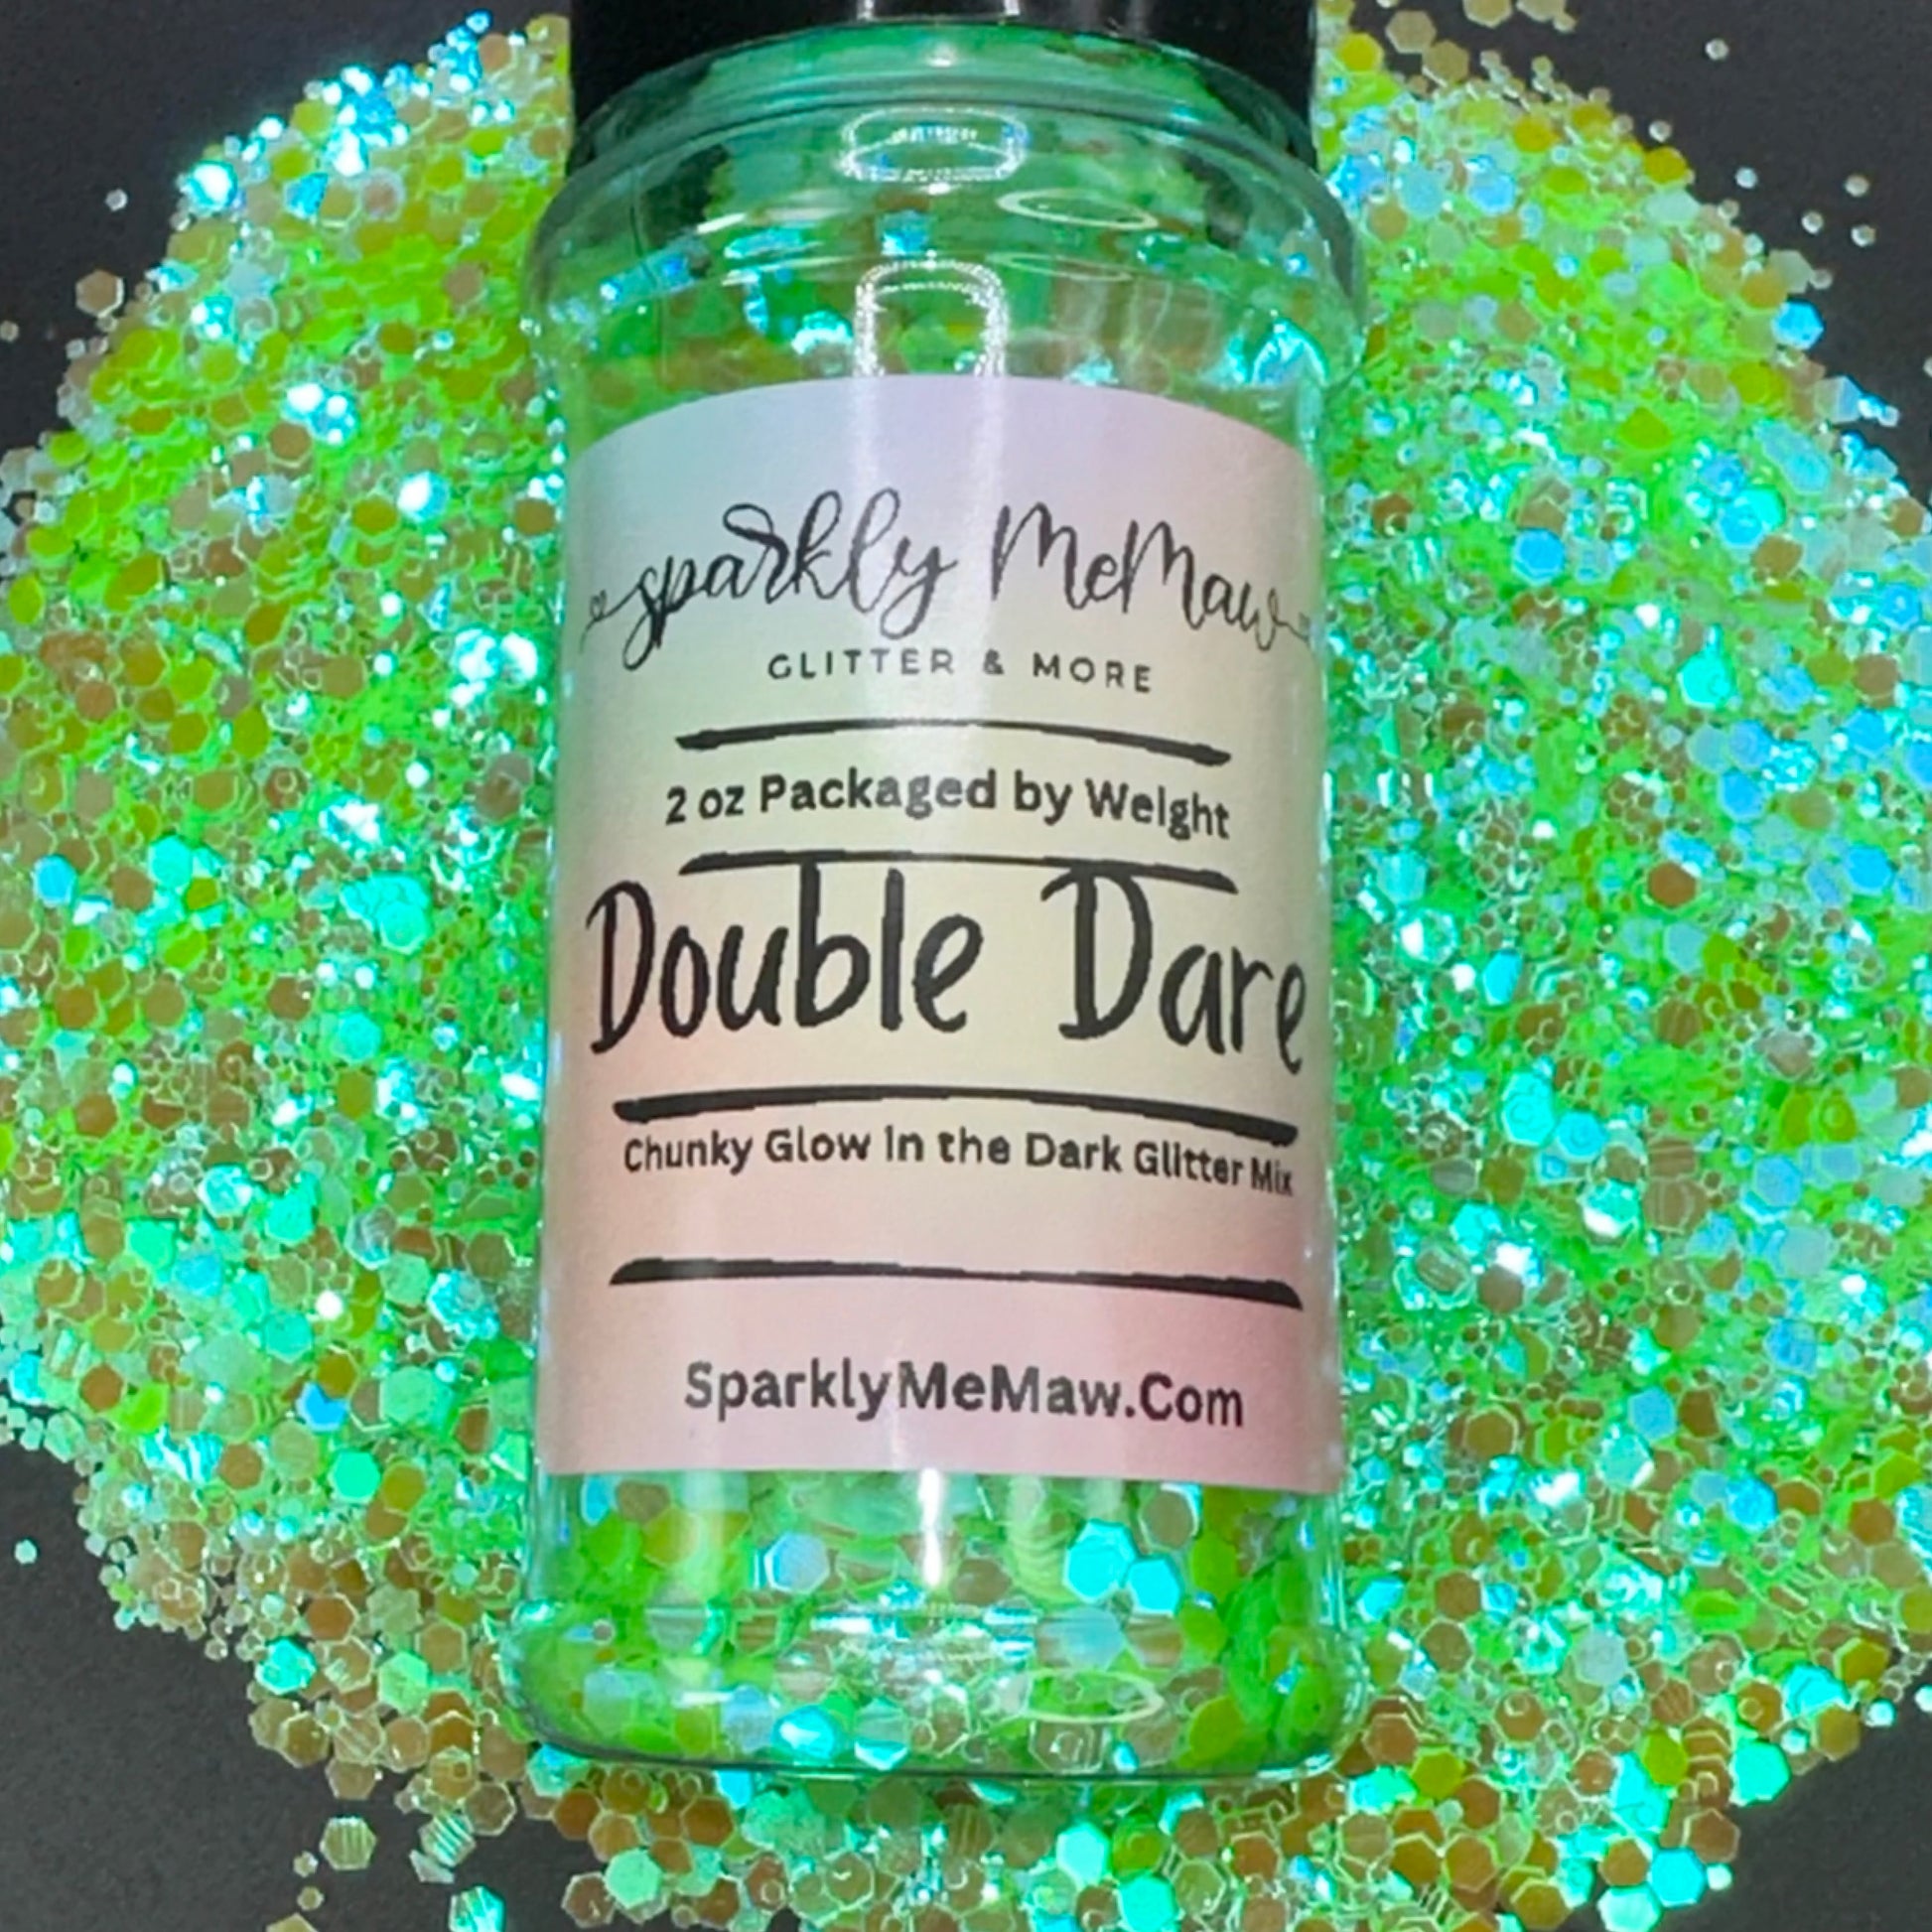 Double Dare Chameleon Glow in the Dark Chunky Glitter Mix